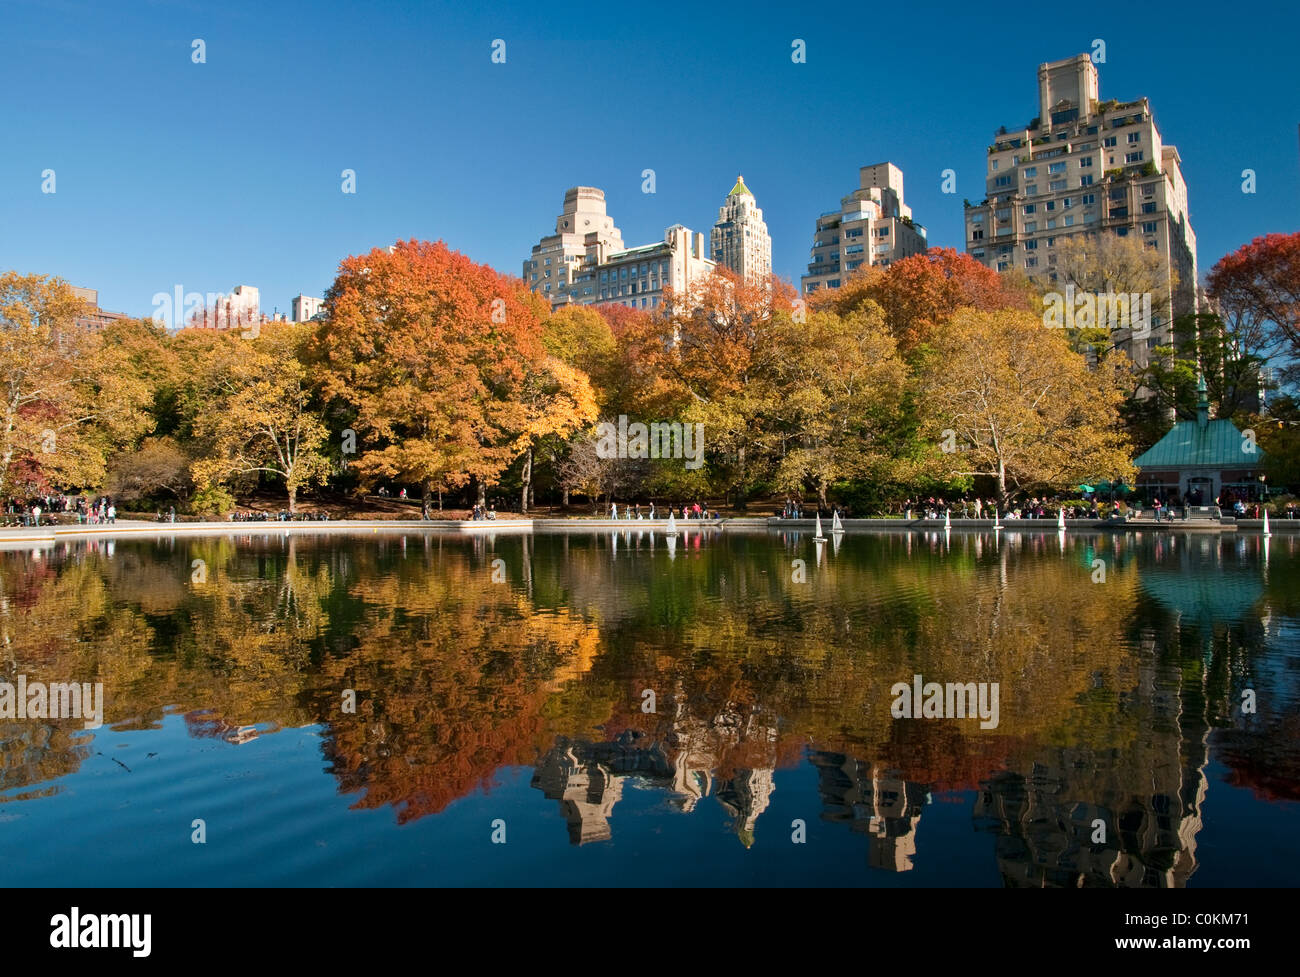 The Model Boat Pond, also known as the Conservatory Water, in Central Park, NYC Stock Photo